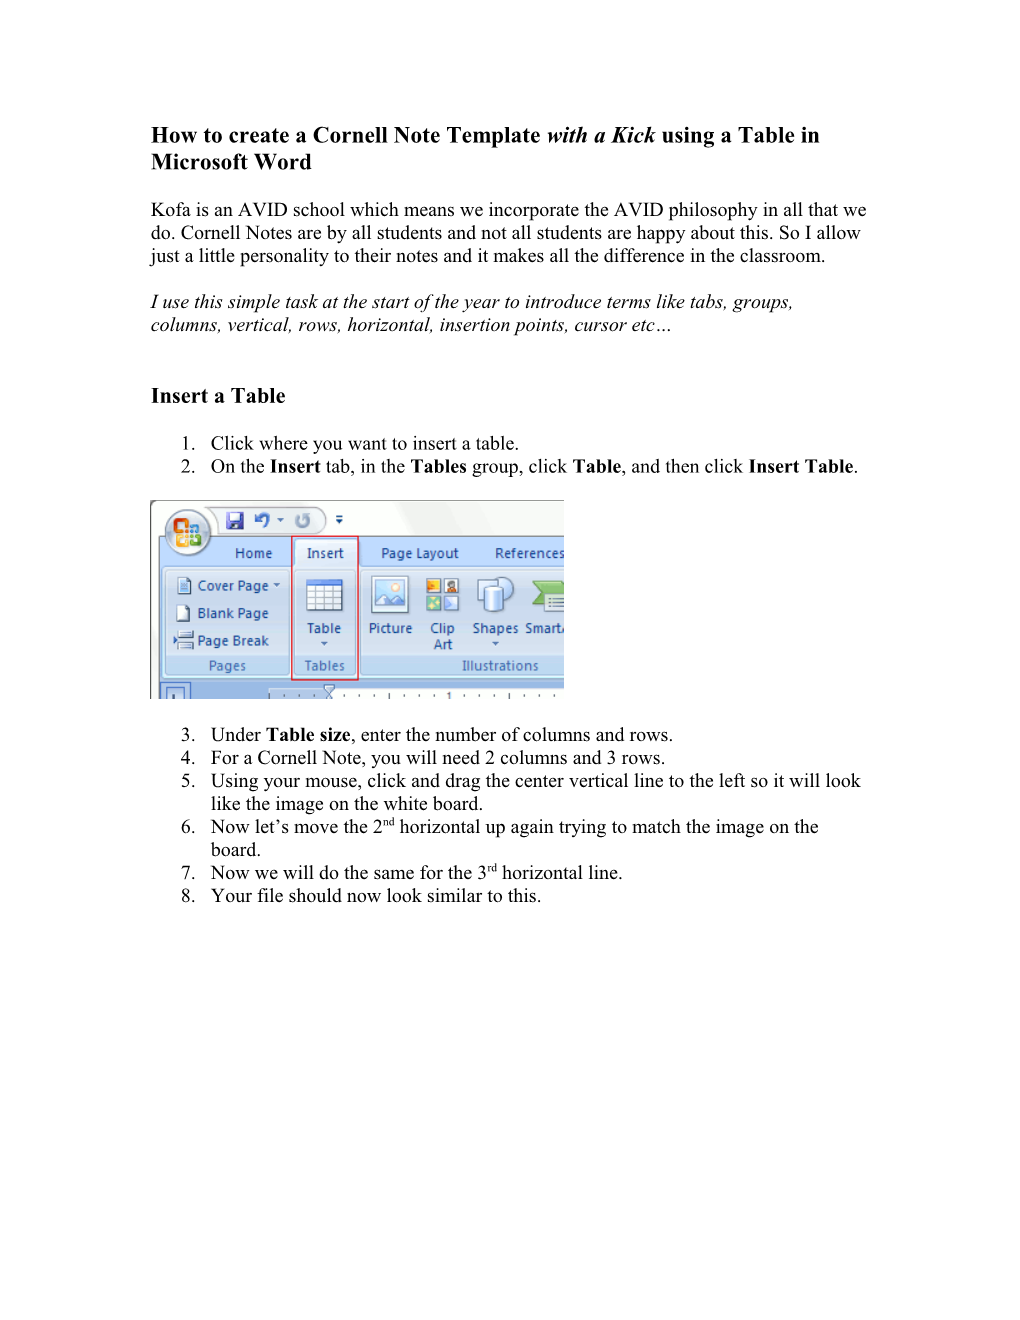 How to Create a Cornell Note Template with a Kick Using a Table in Microsoft Word